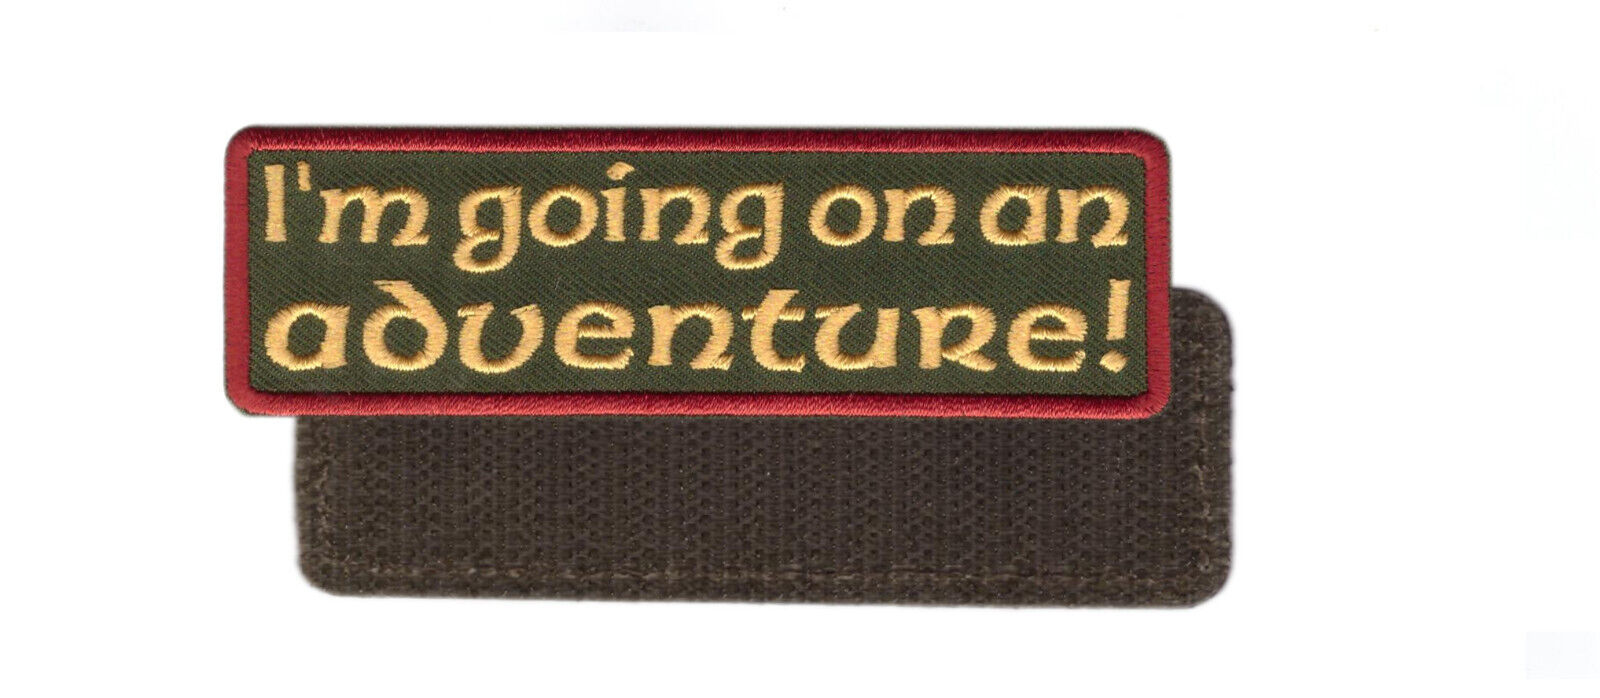 Going On an Adventure Hobbit Morale Patch for VELCRO® BRAND Hook Fastener